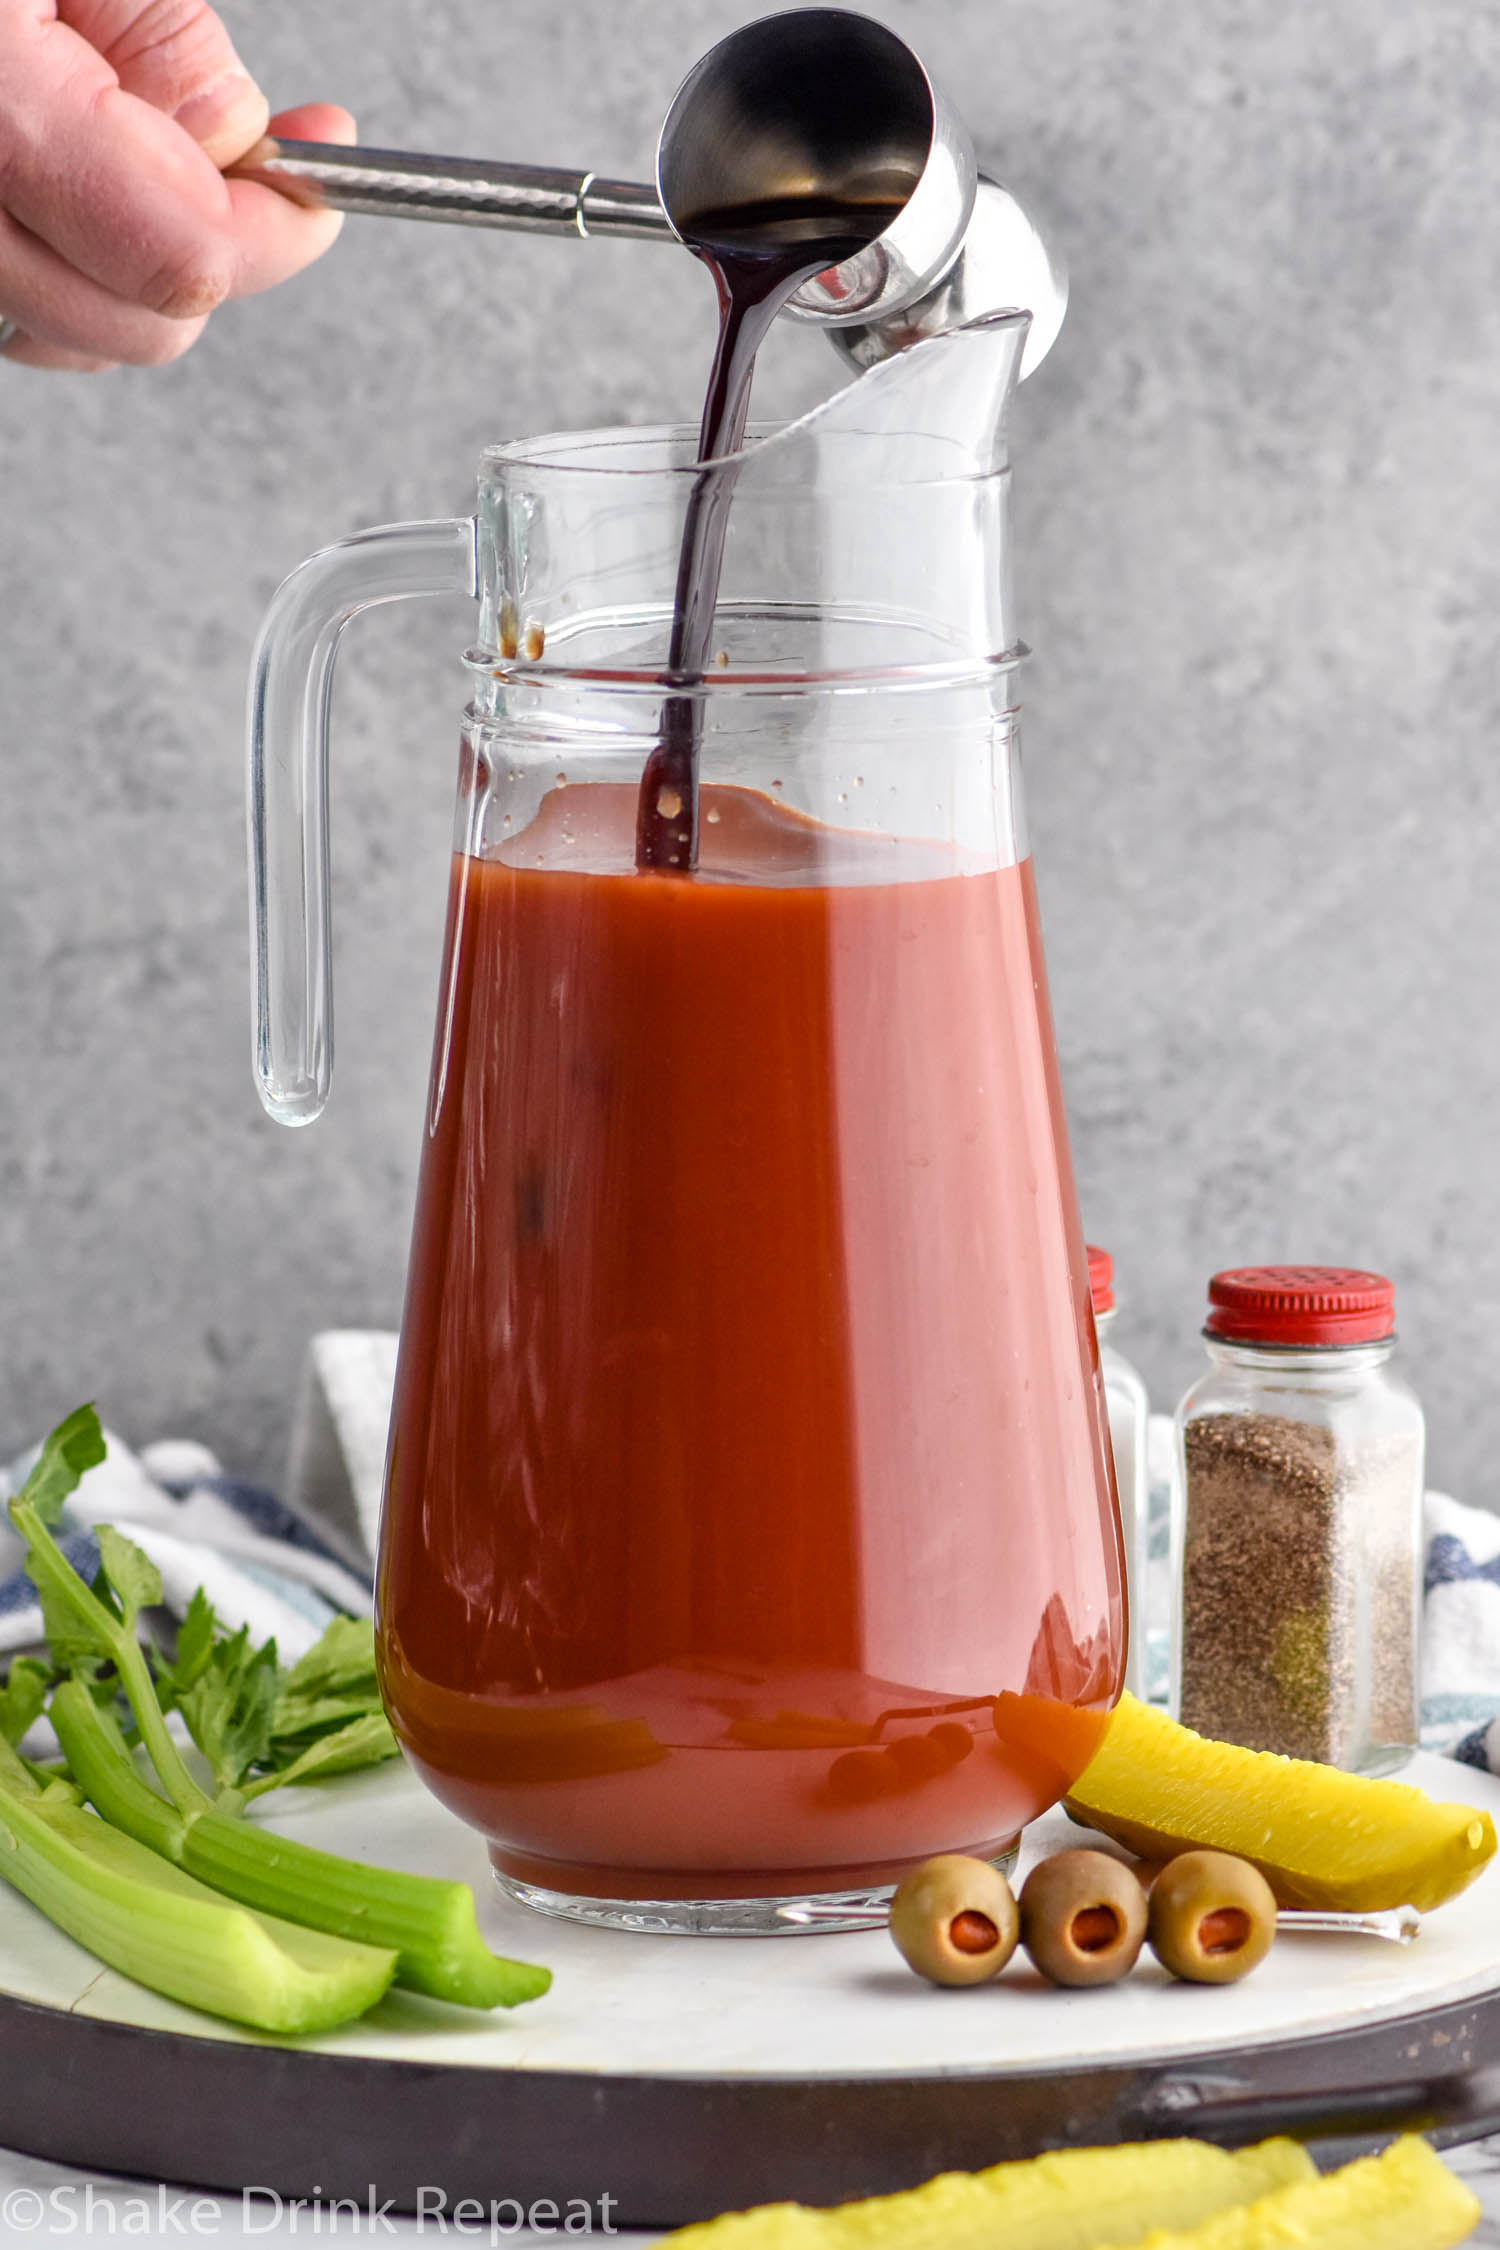 Photo of person's hand pouring worcestershire sauce into pitcher of ingredients for Bloody Mary Mix recipe.